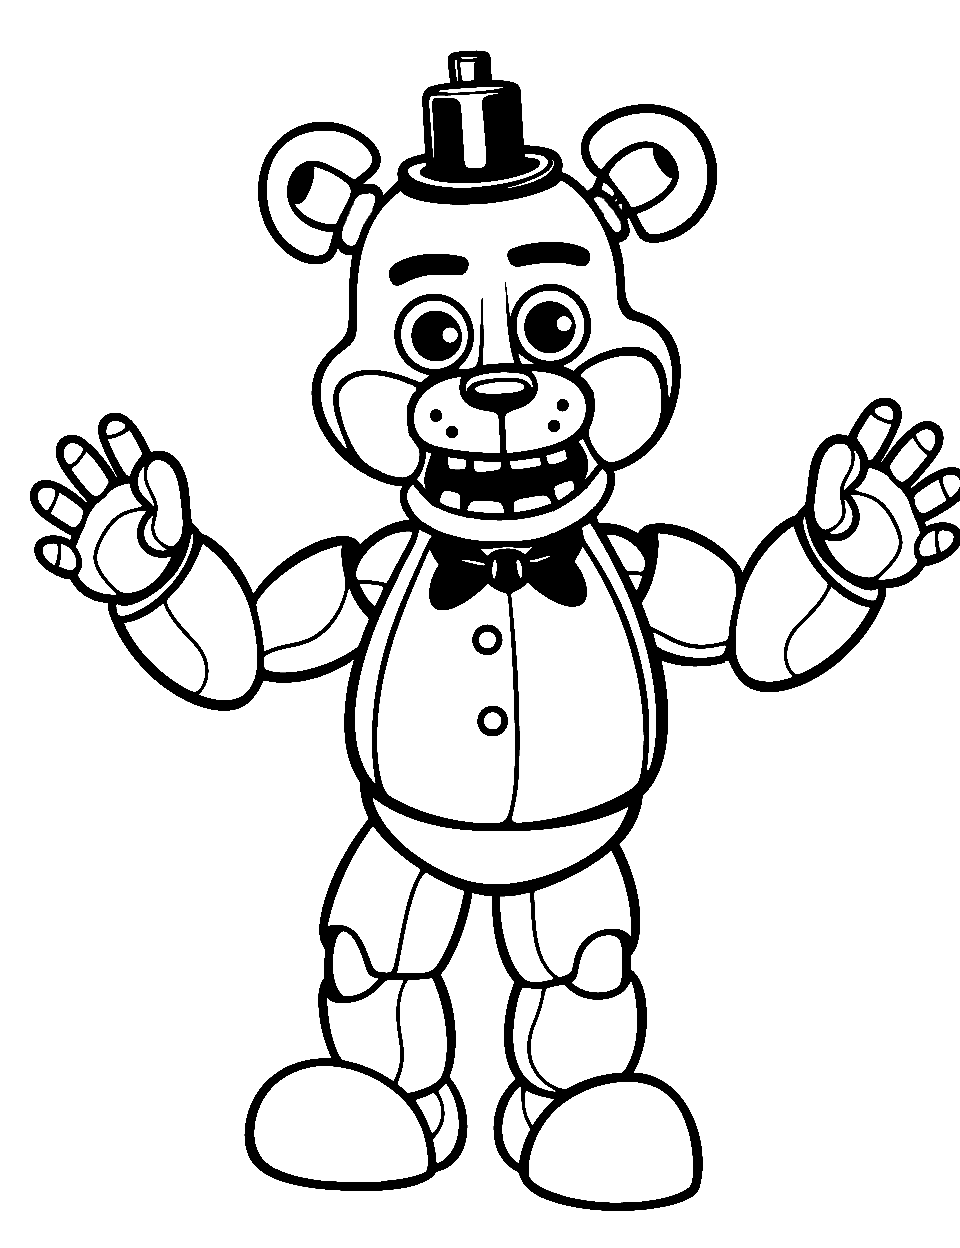 Fun with Funtime Freddy Coloring Page - Funtime Freddy waving cheerily in a brightly lit room.